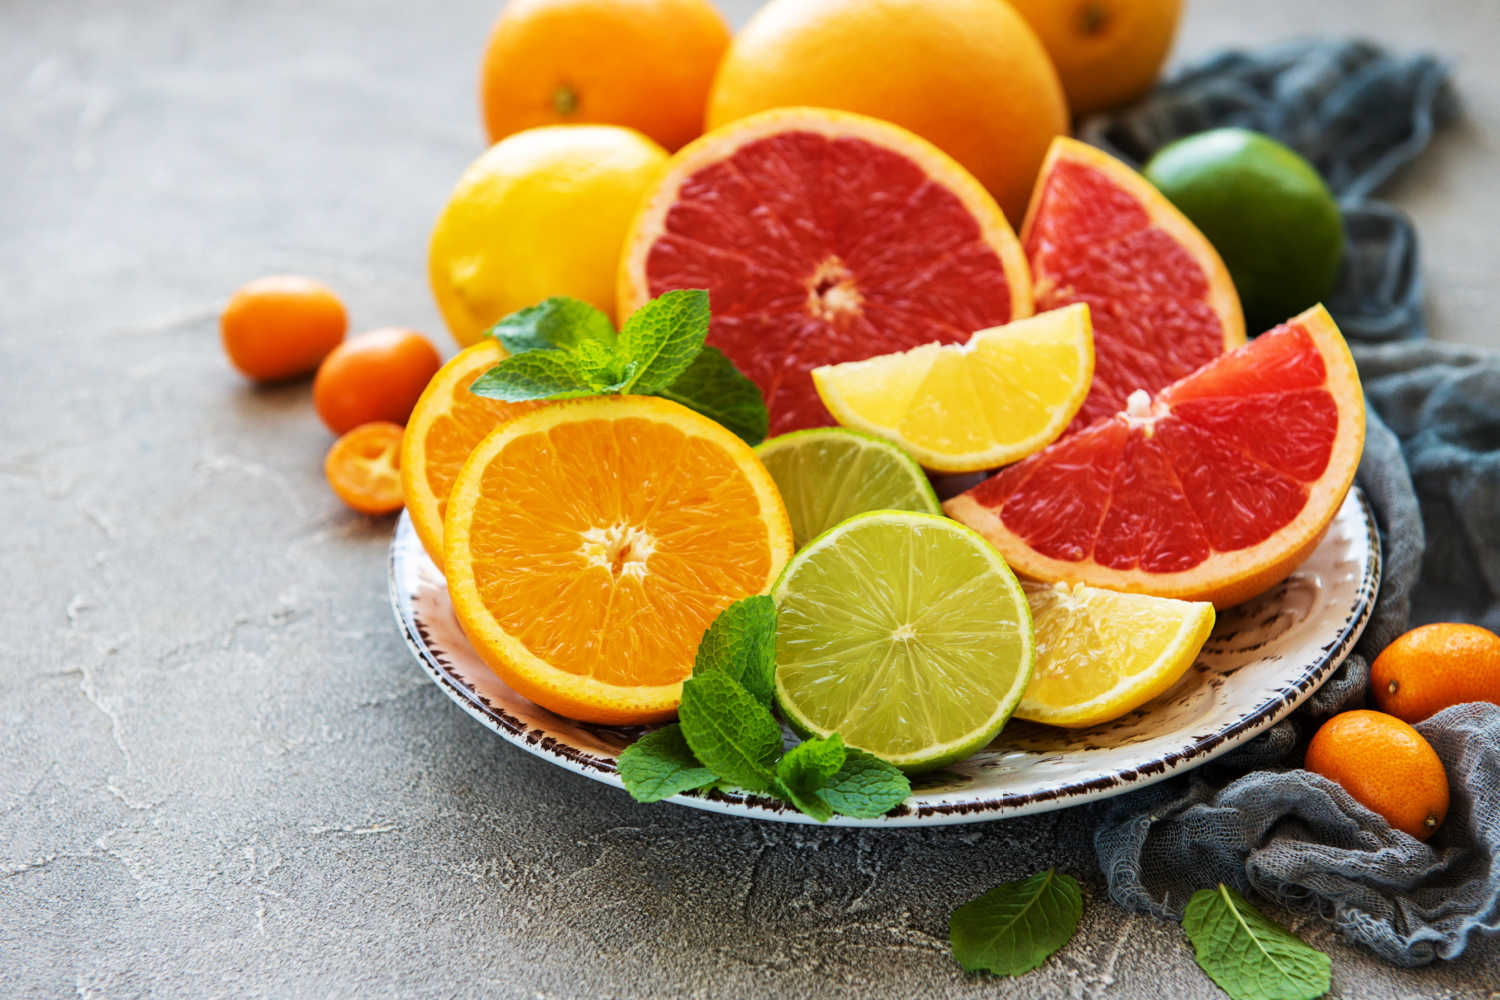 Citrus fruits help in combating bad breath